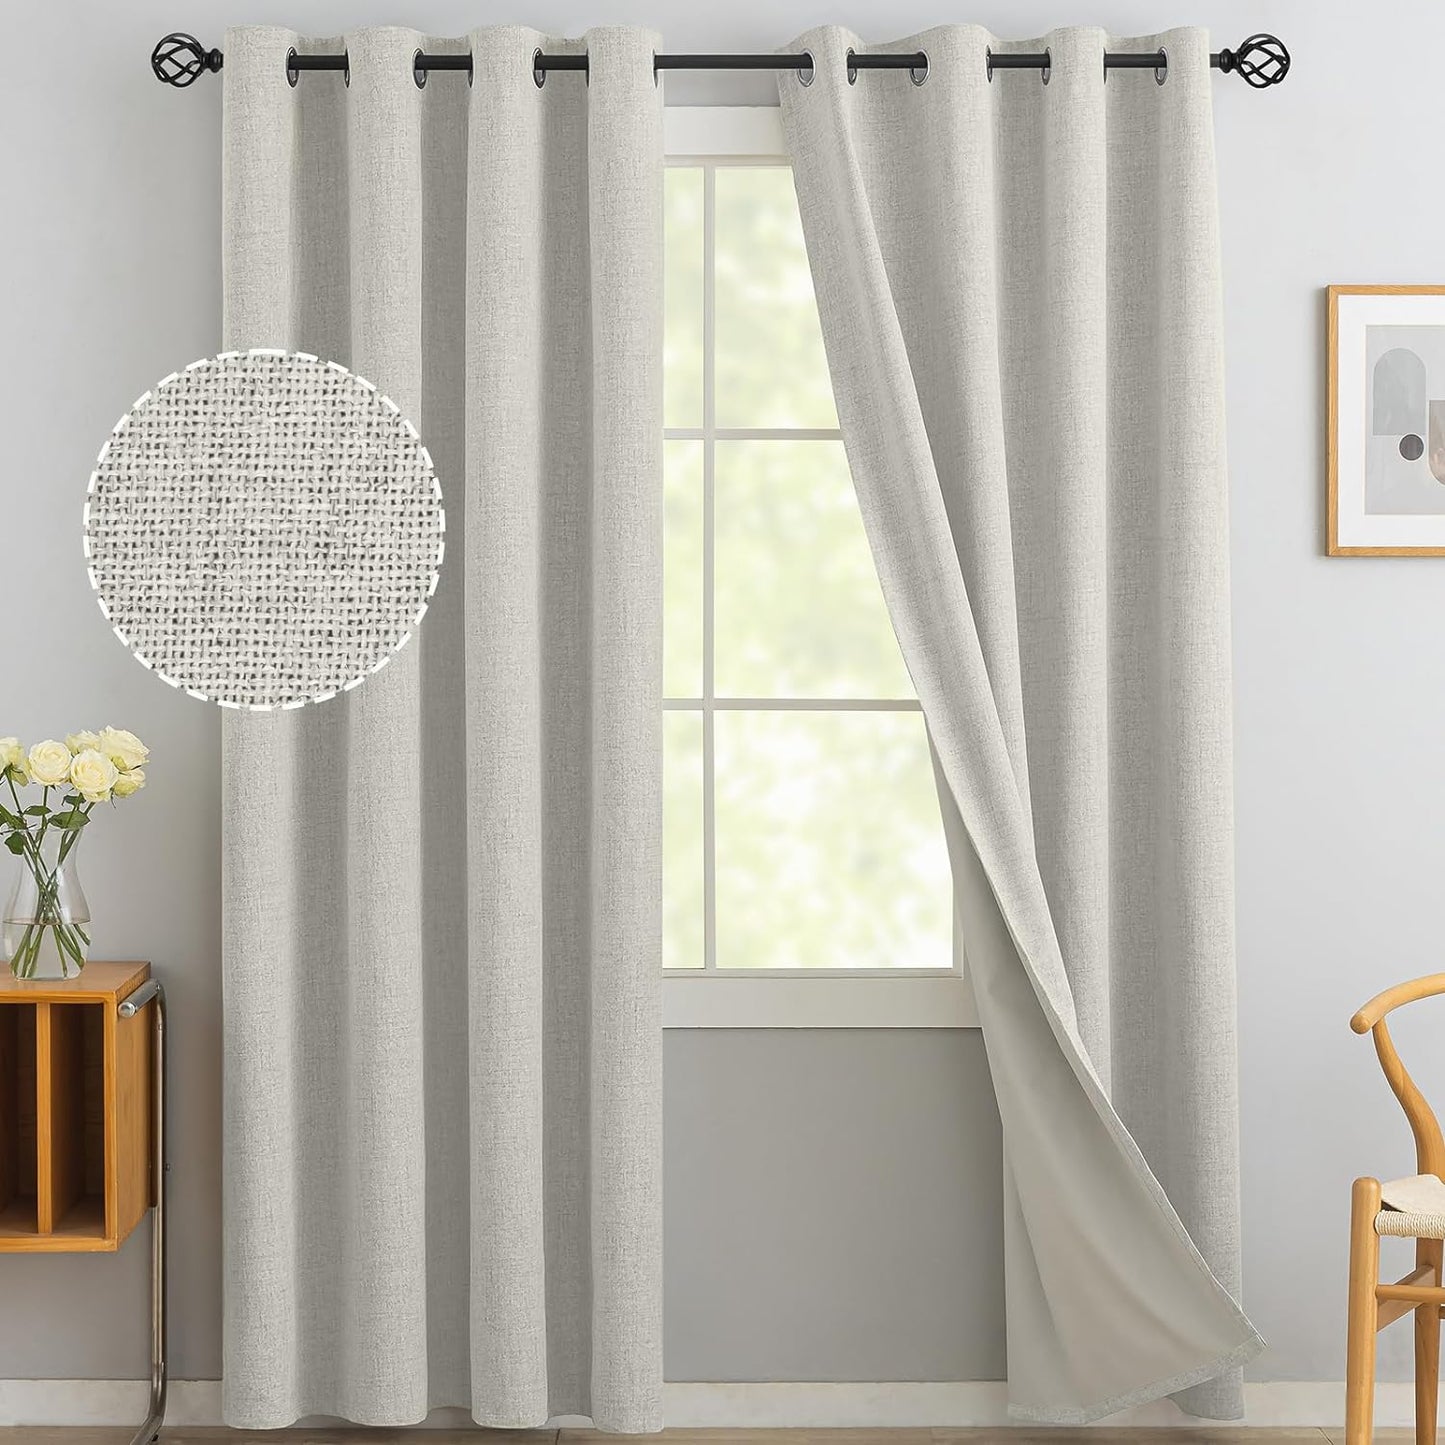 Yakamok Natural Linen Curtains 100% Blackout 84 Inches Long,Room Darkening Textured Curtains for Living Room Thermal Grommet Bedroom Curtains 2 Panels with Greyish White Liner  Yakamok Cream 52W X 90L / 2 Panels 